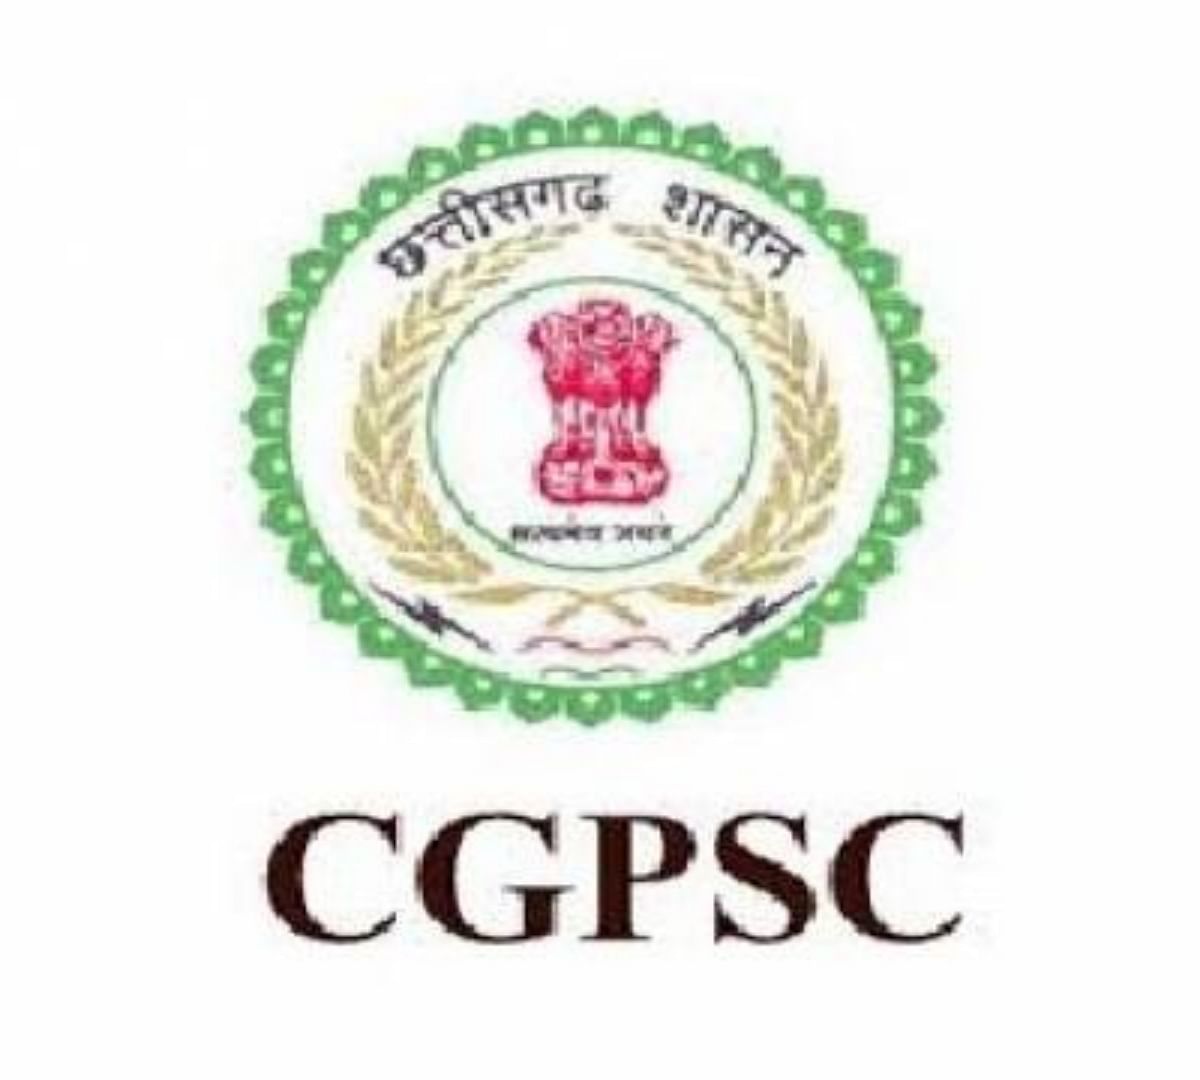 CGPSC PCS 2021: Interview Schedule Released, Check Official Notification Here